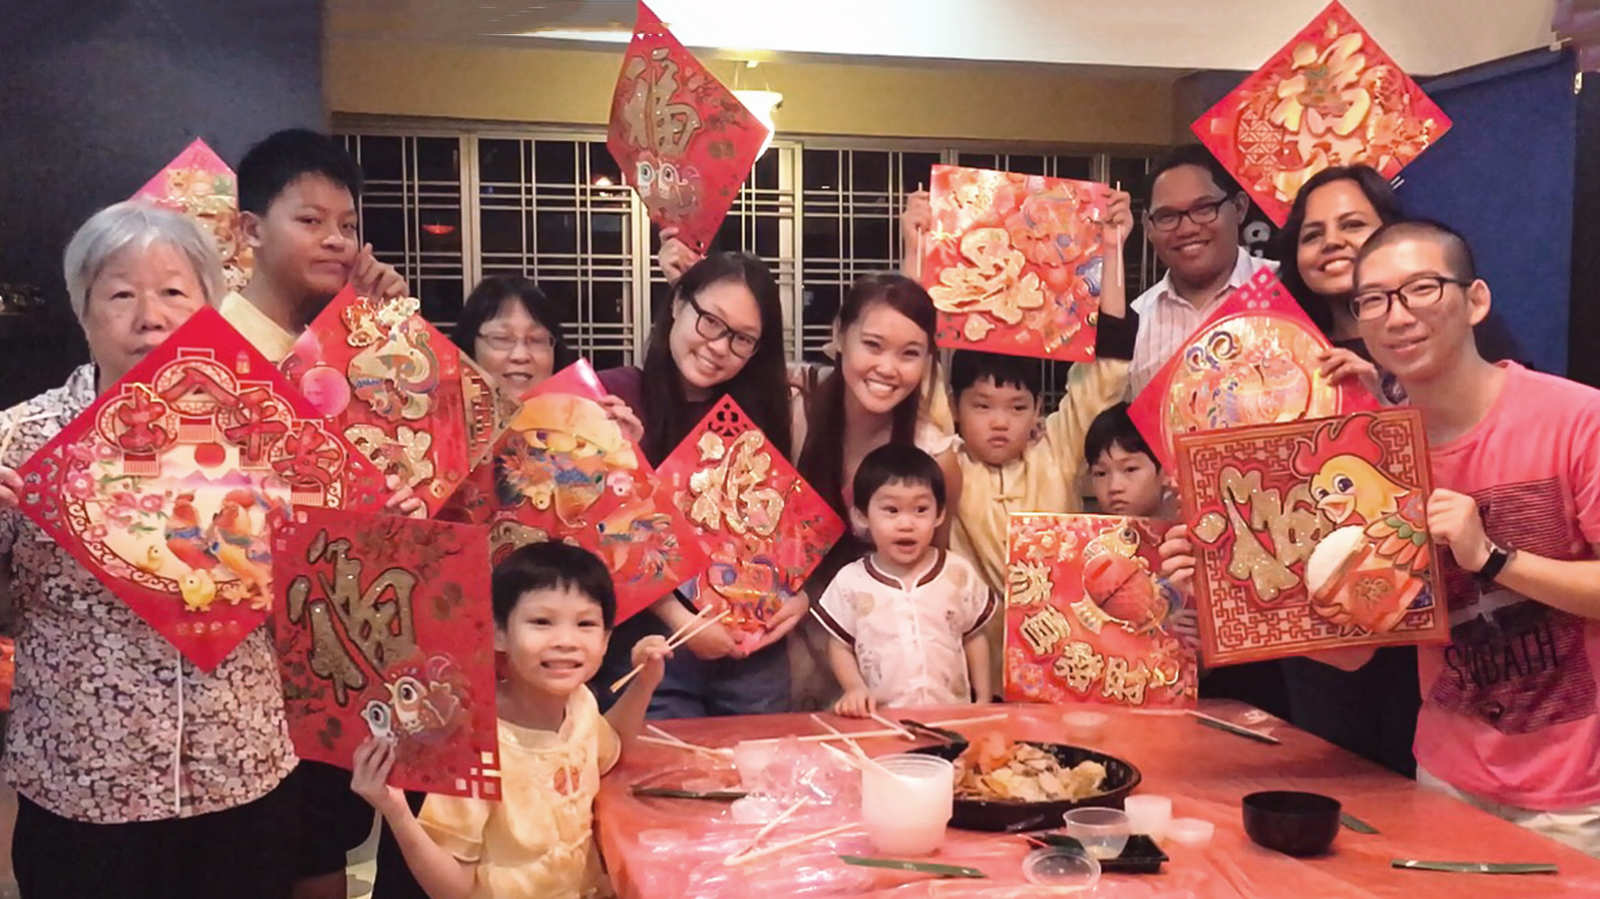 Singaporean family opens their home to foreigners who will be lonely on Chinese New Year